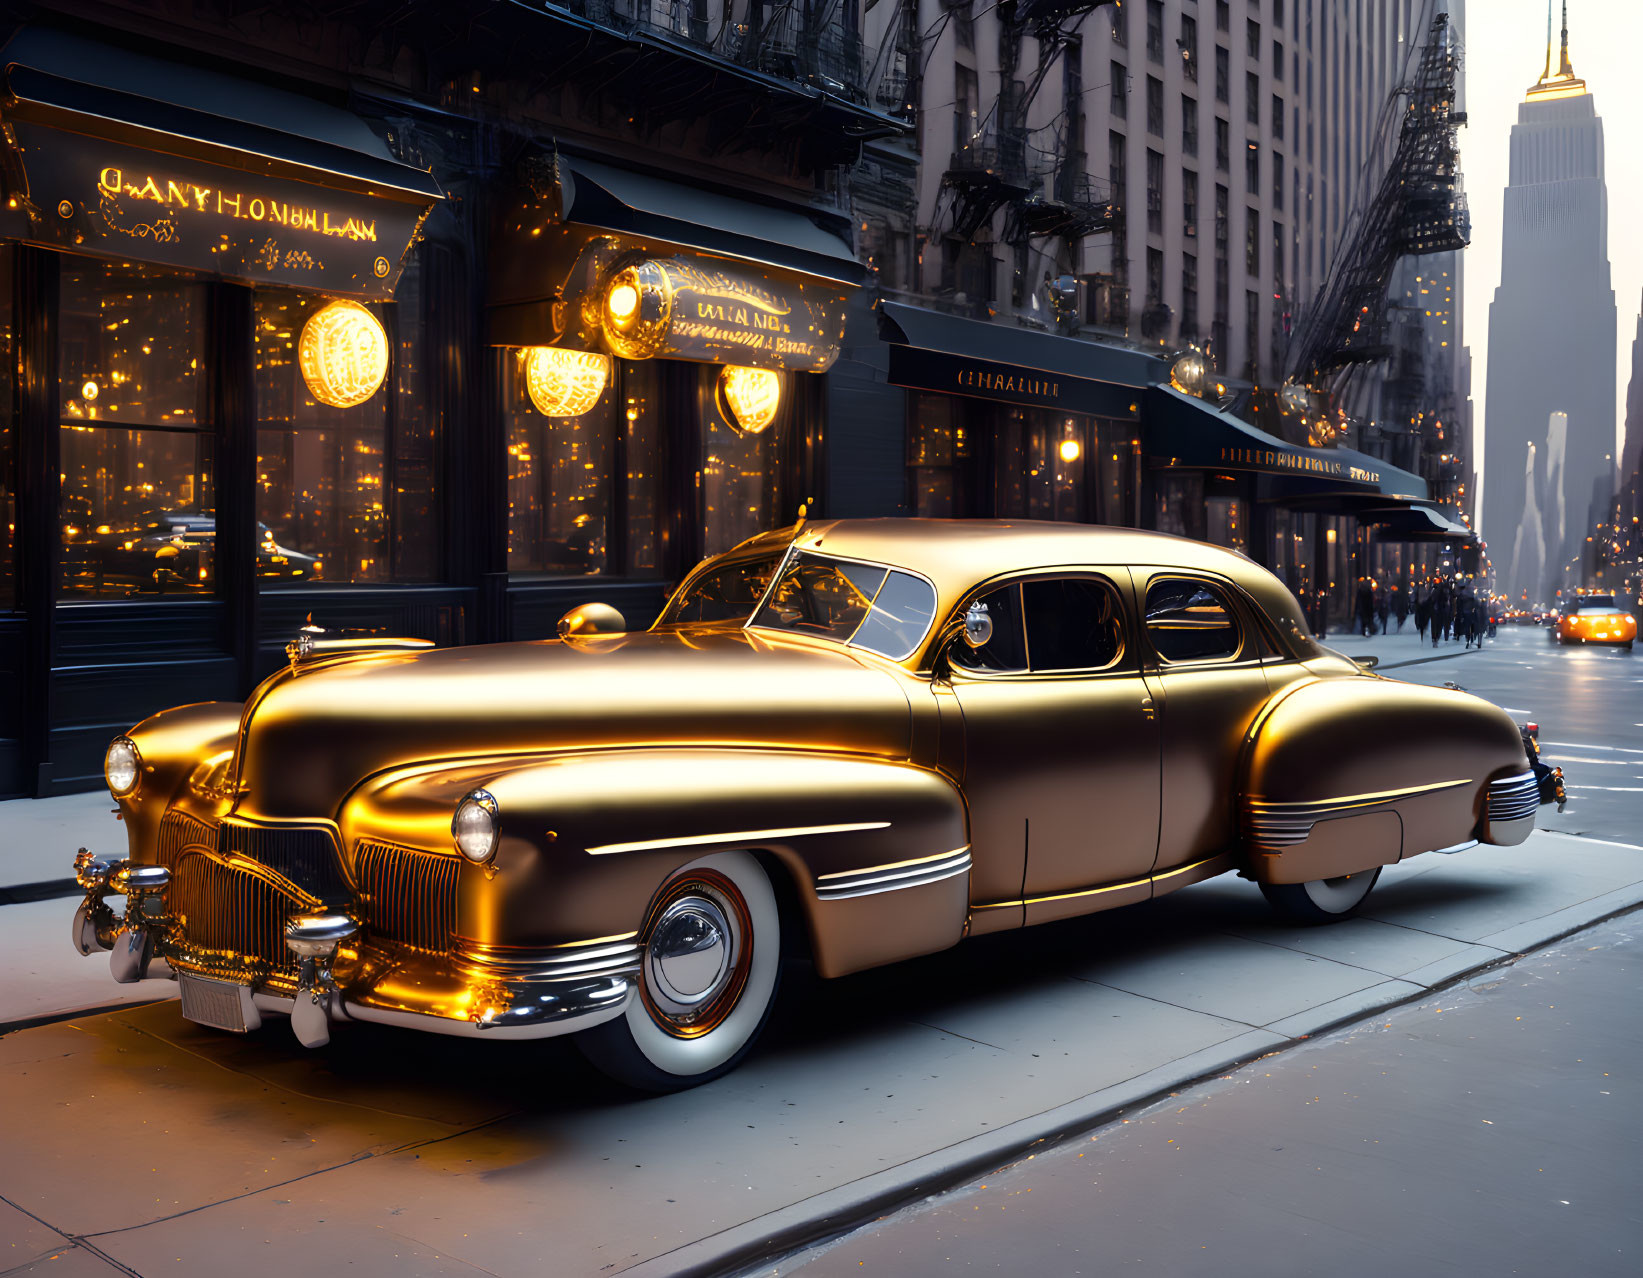 Classic Car Parked on City Street at Dusk with Urban Buildings and Shop Fronts